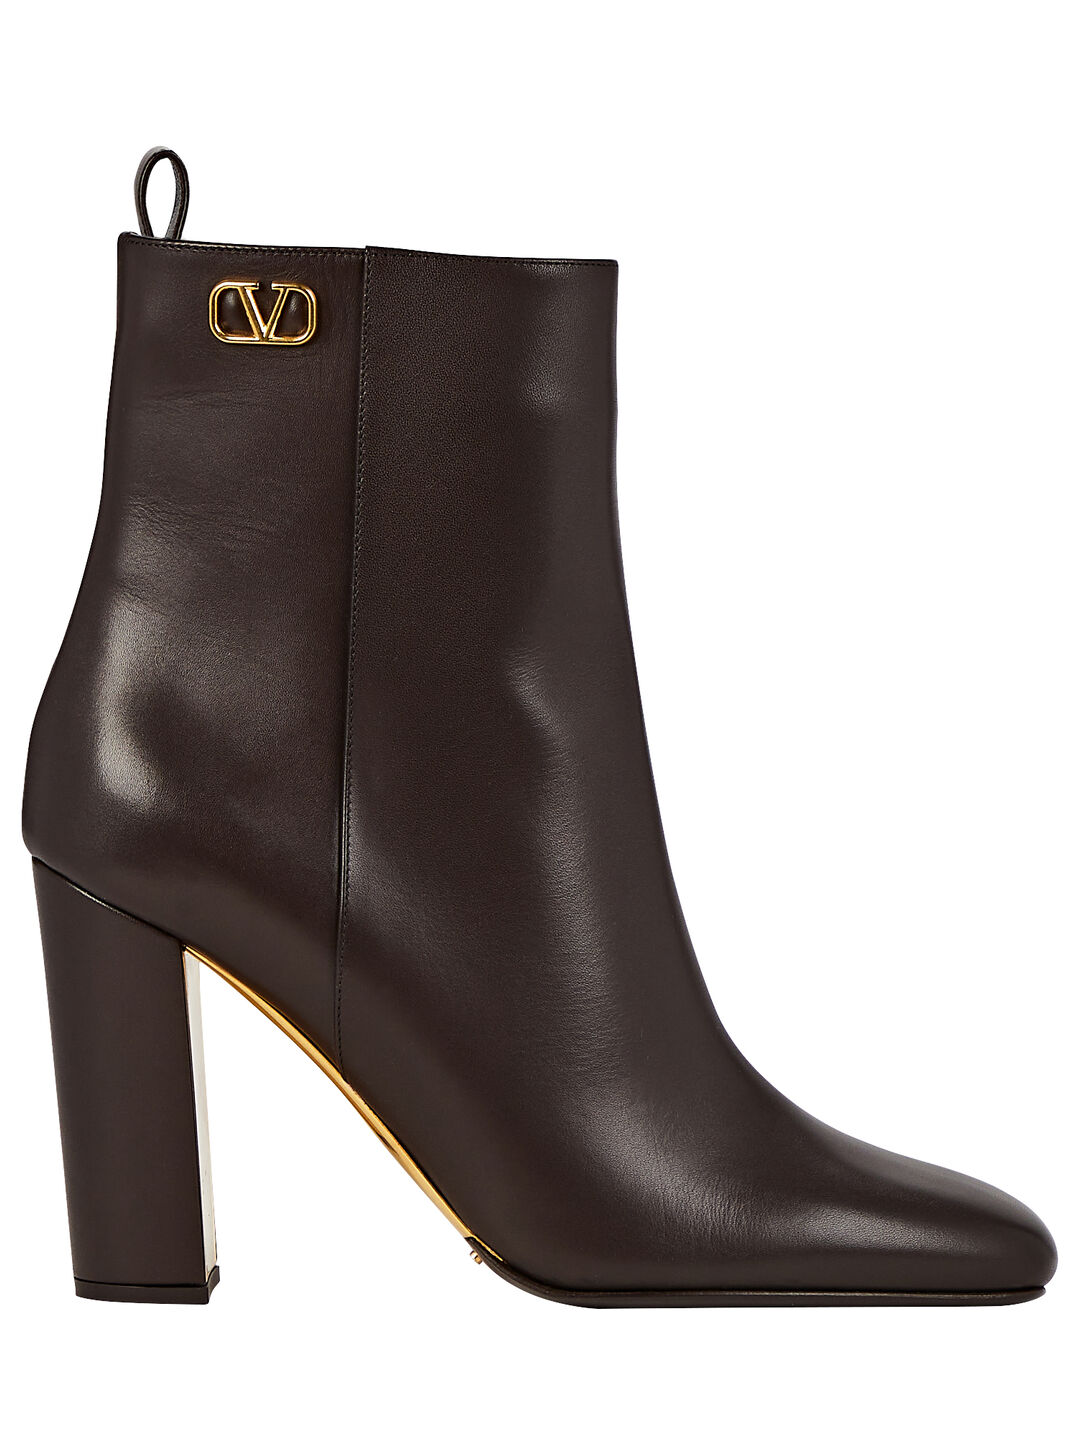 Golden Walk 90 Leather Ankle Boots